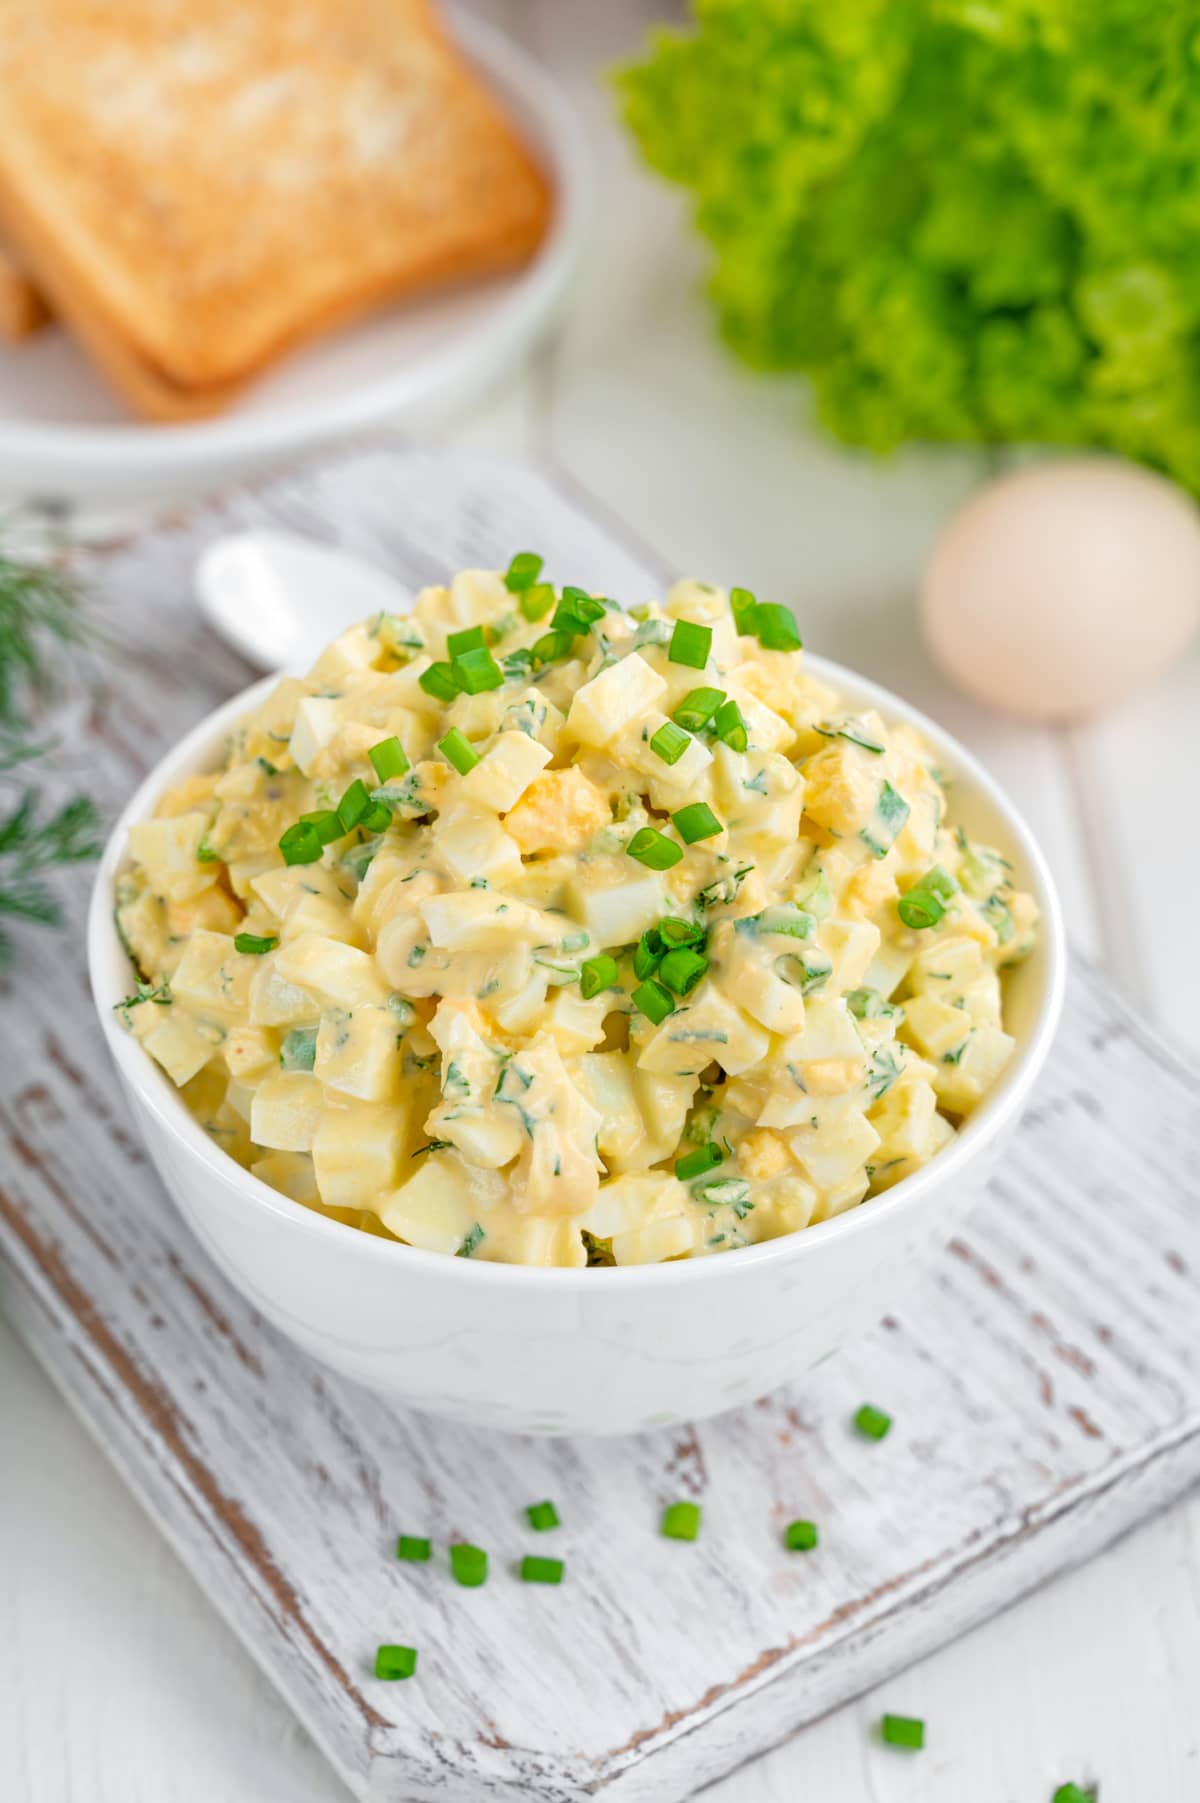 Egg salad in a white bowl